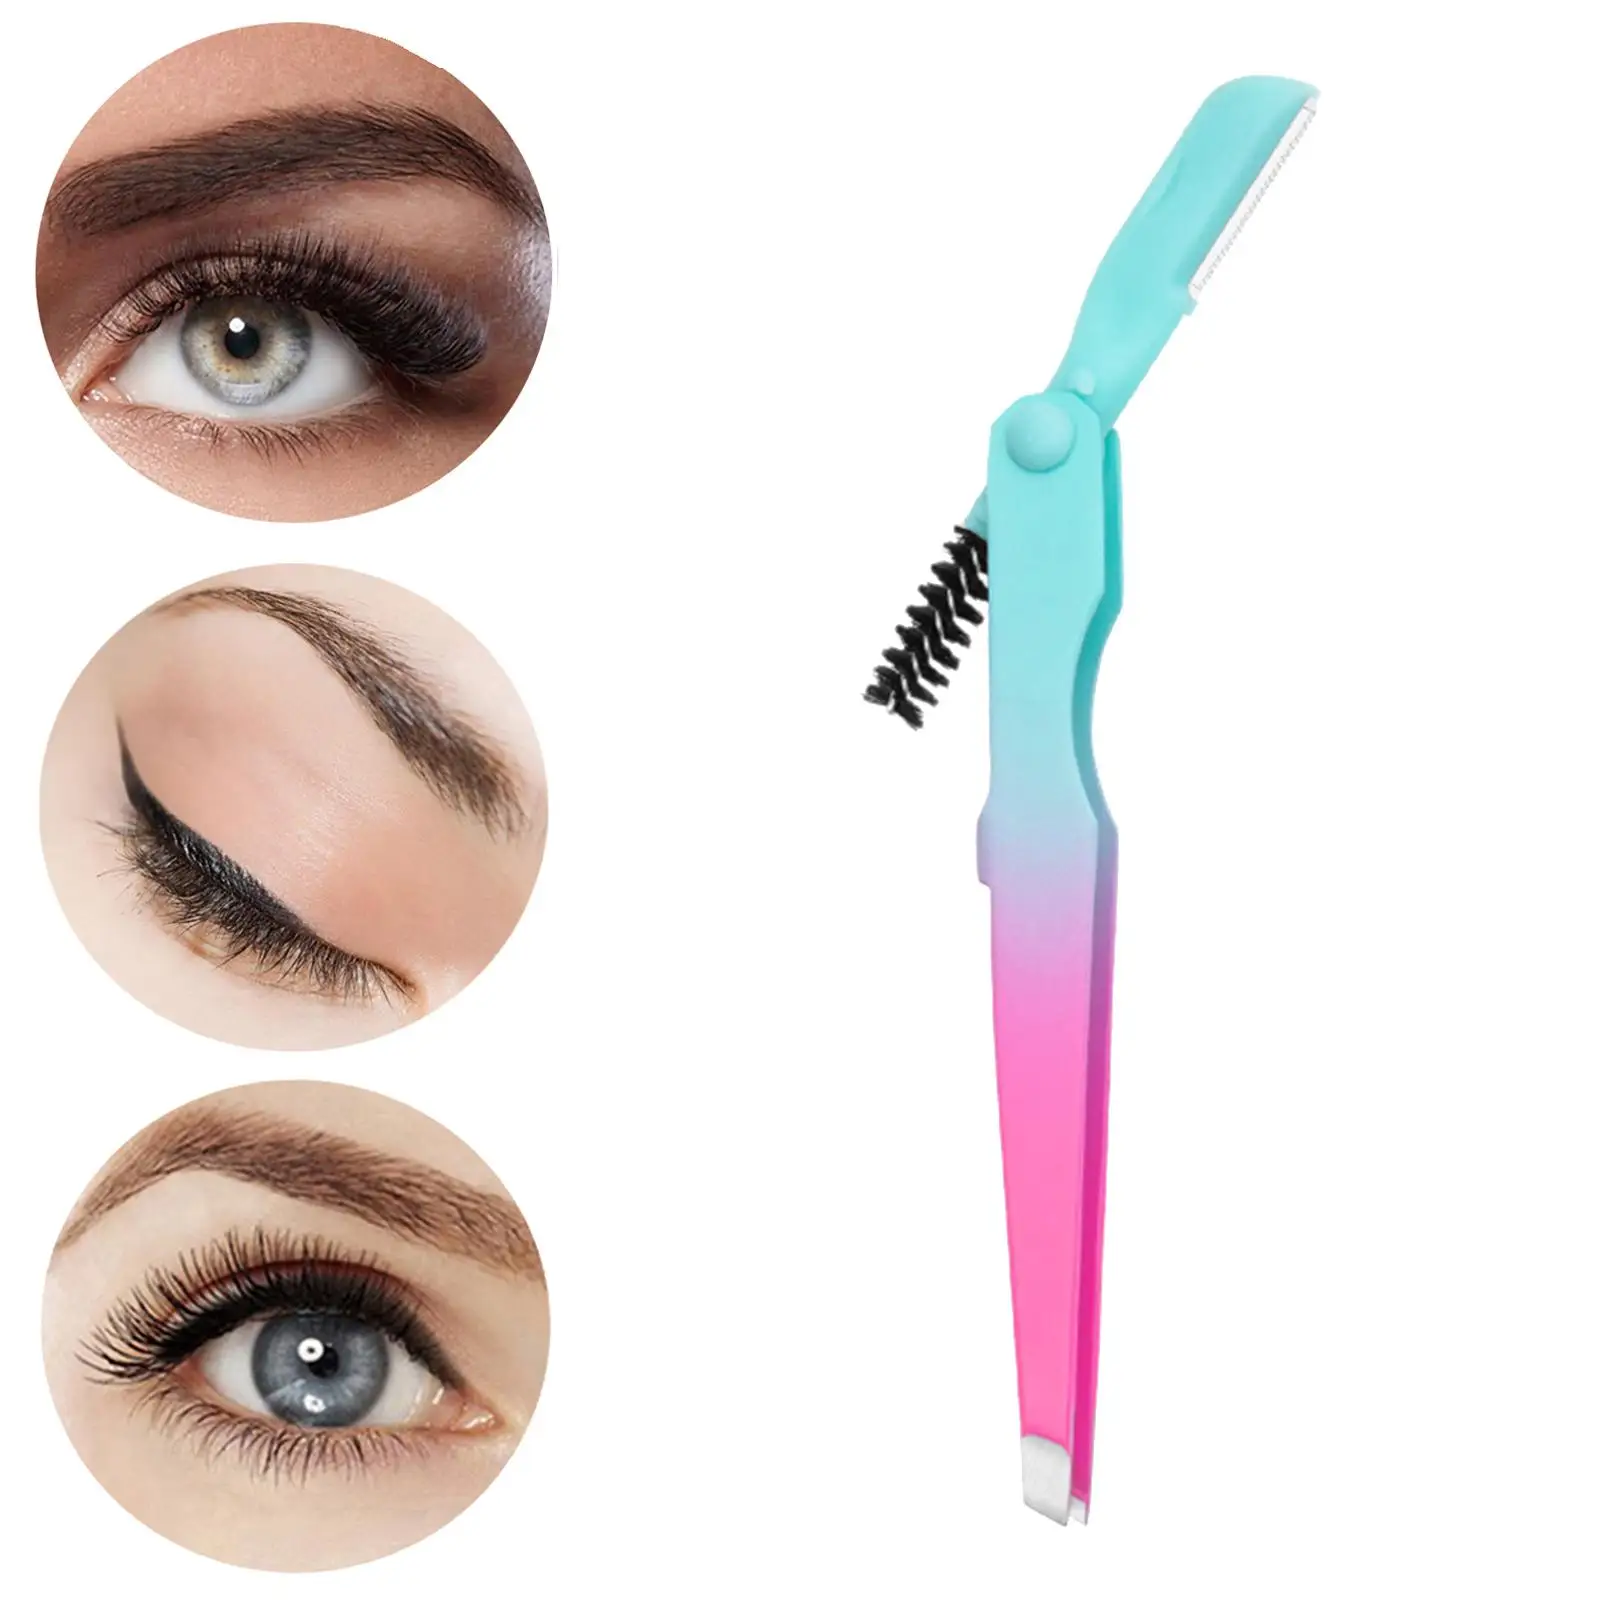 Eyebrow Tweezers Multipurpose Face Hair Remover Professional Eyebrow Trimming Comfortable Grip Brow Trimmer 3 in 1 Eyebrow Brush